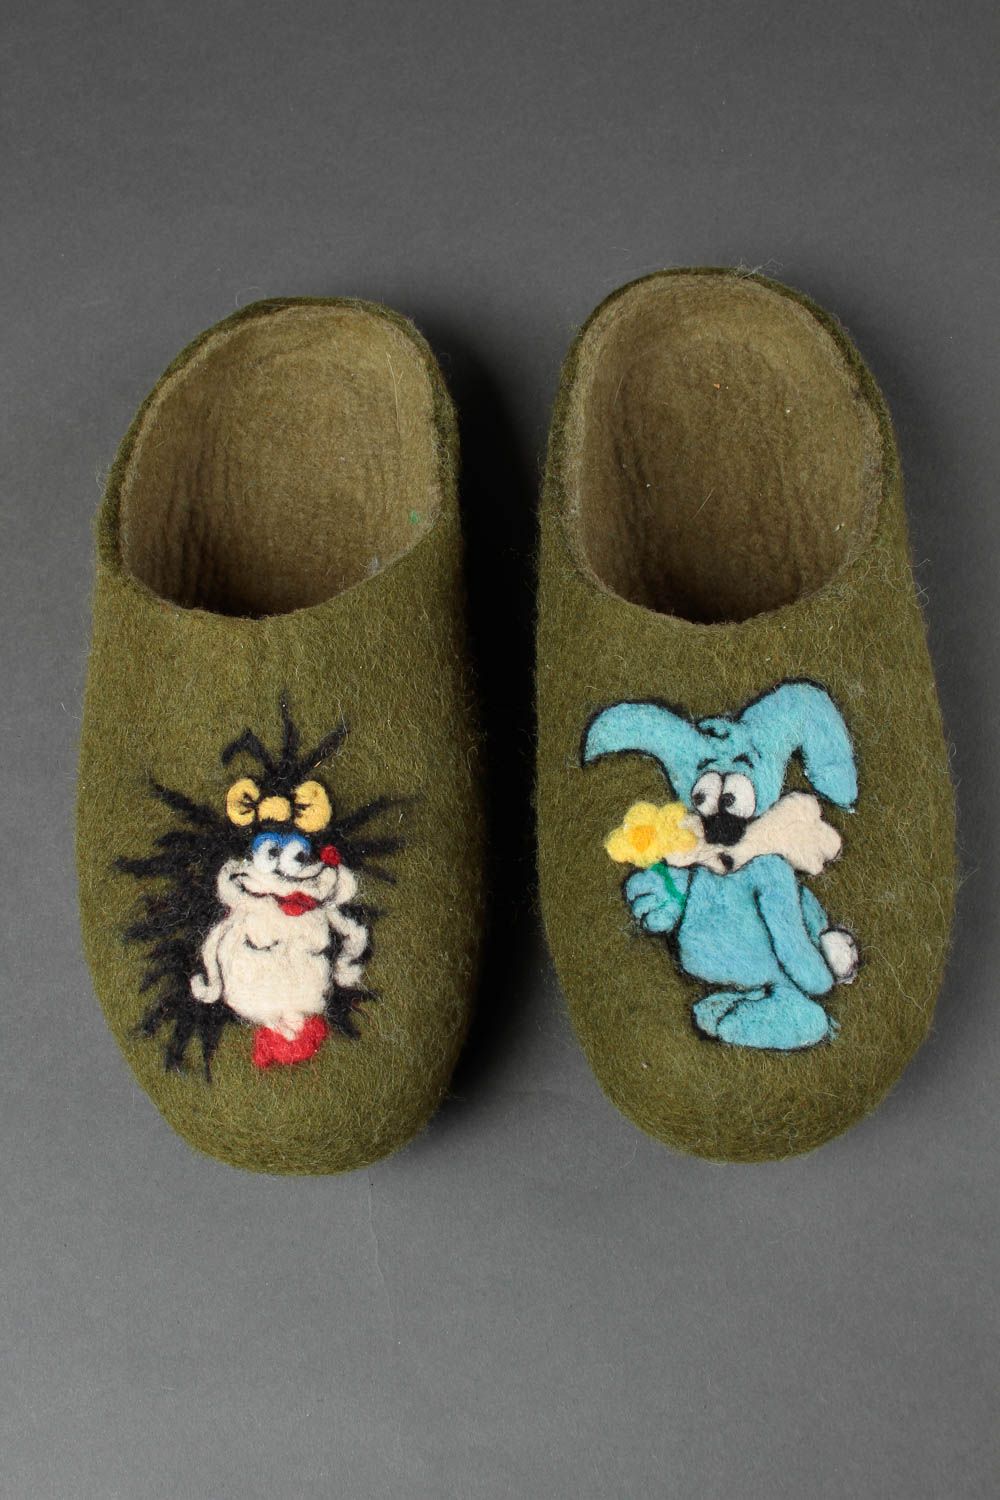 Handmade felted slippers home woolen slippers with animals stylish present photo 3